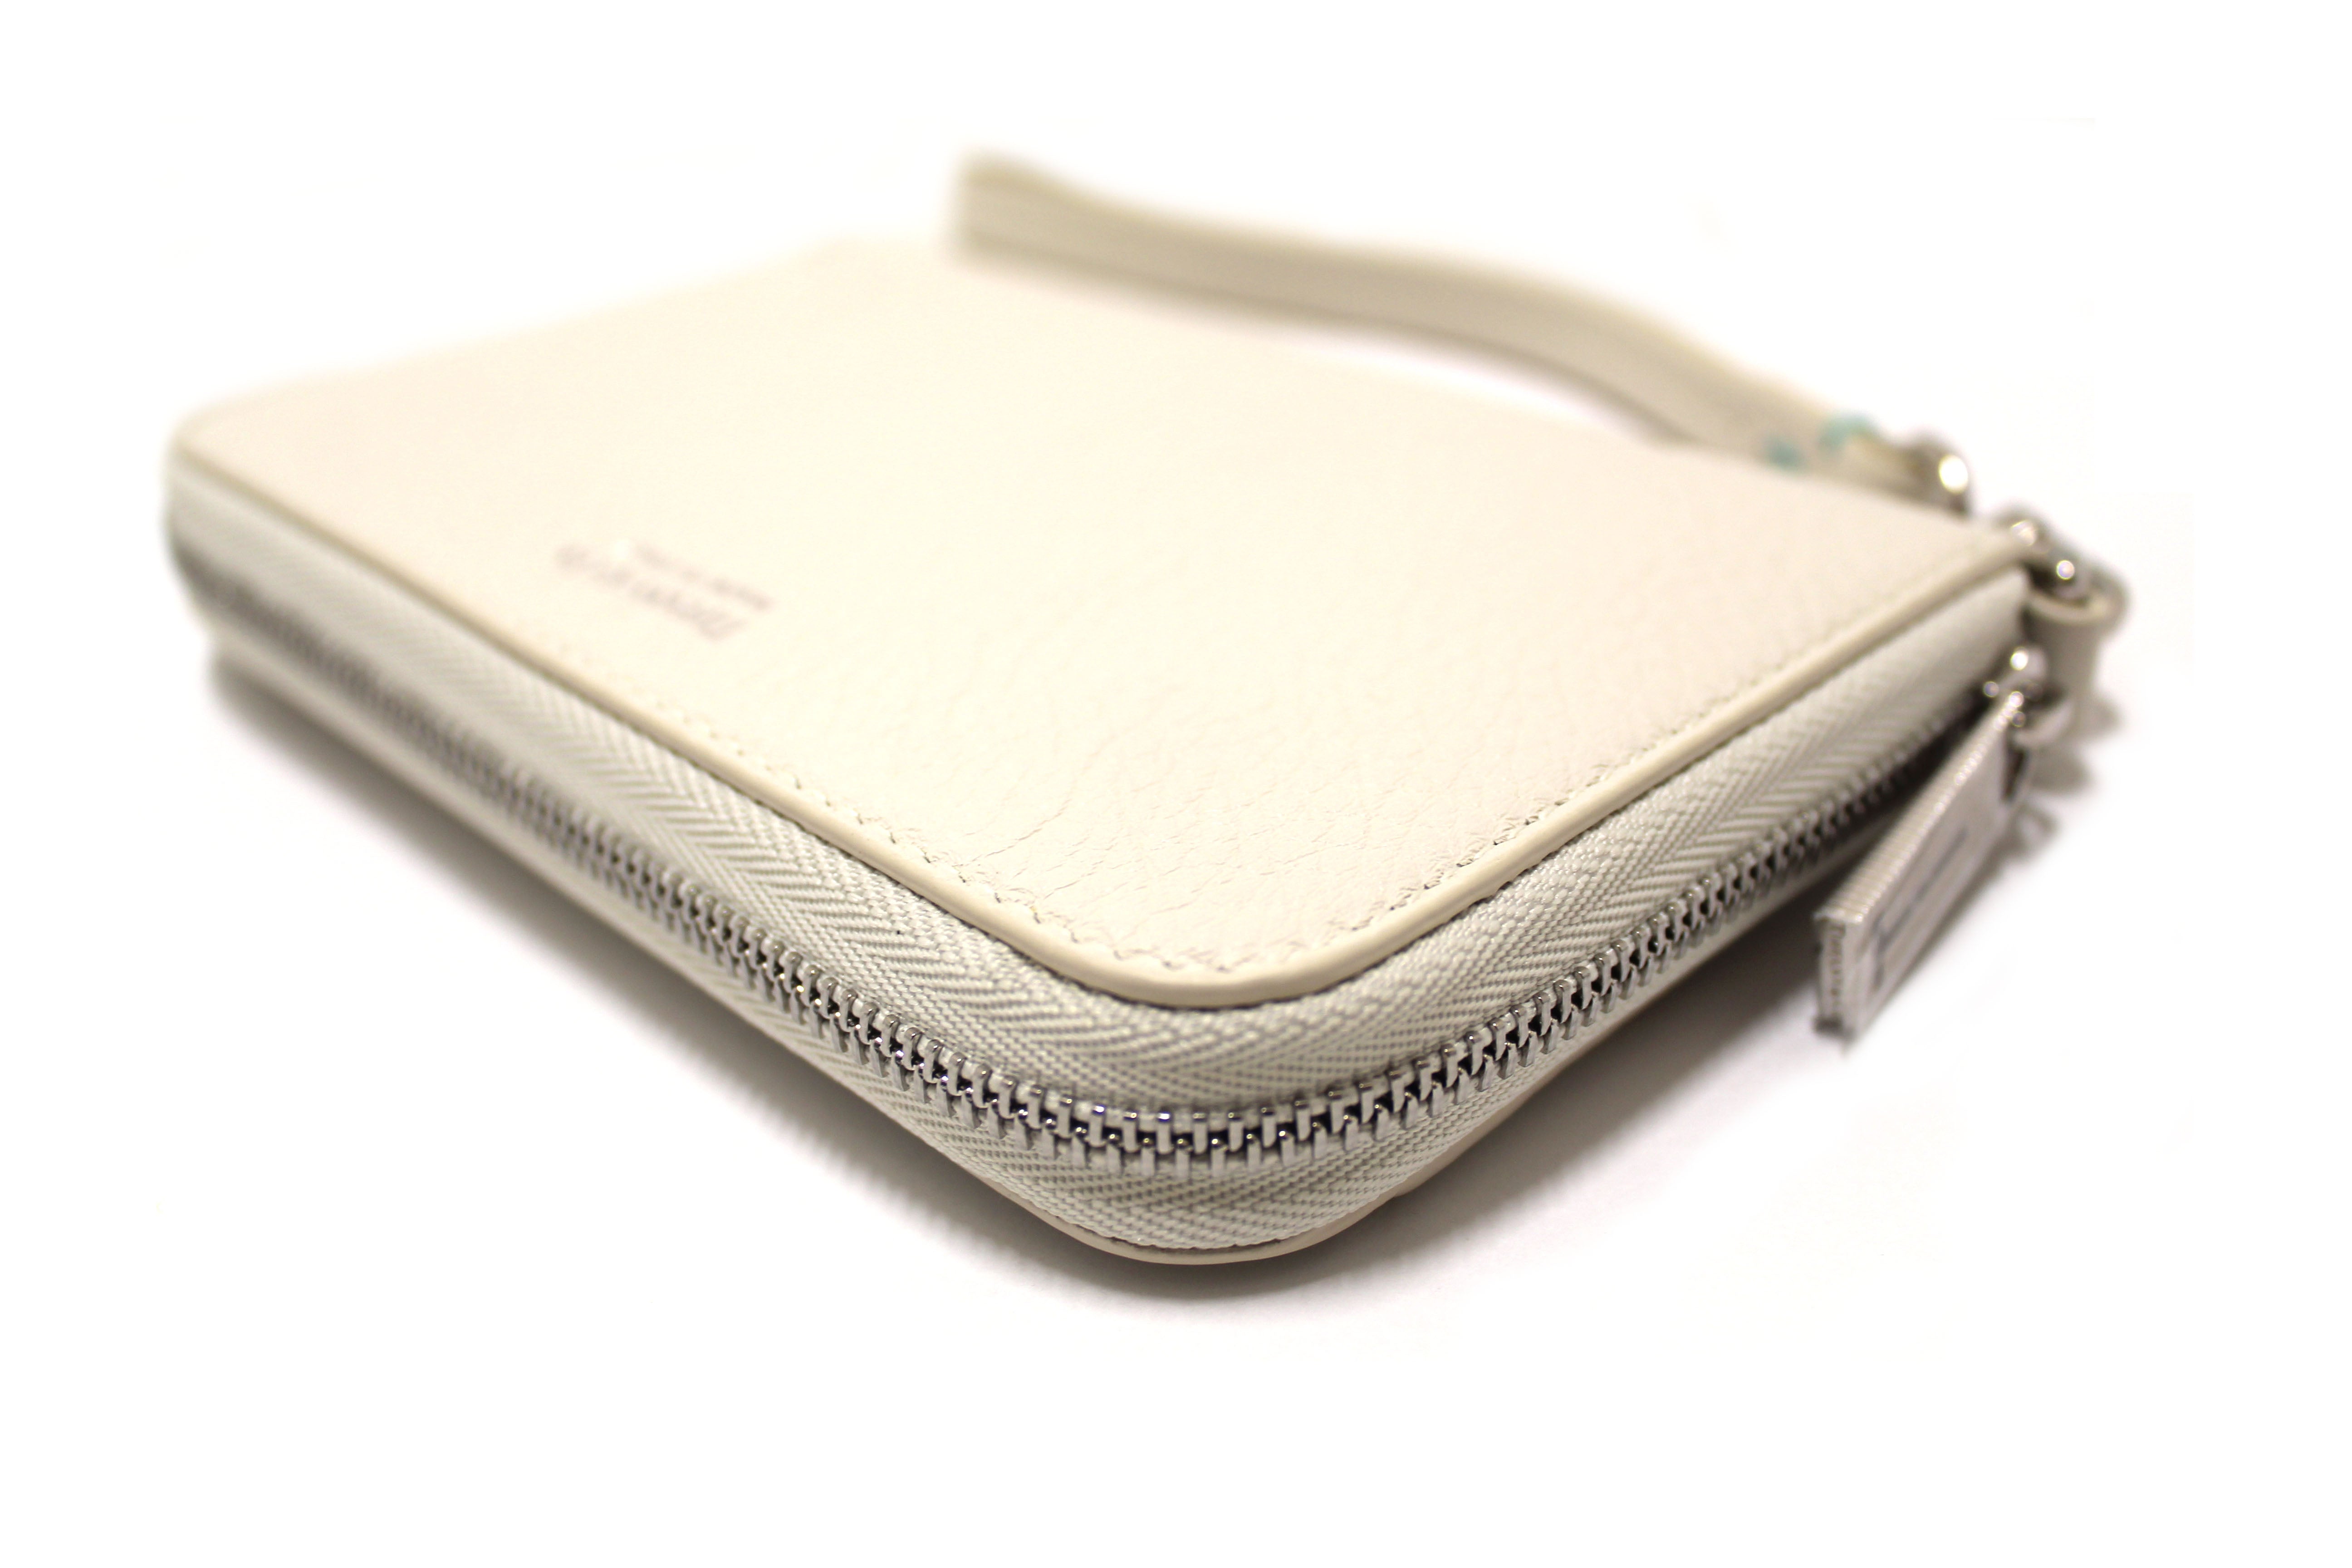 Authentic NEW Tiffany & Co. White Calfskin Leather Wristlet Wallet